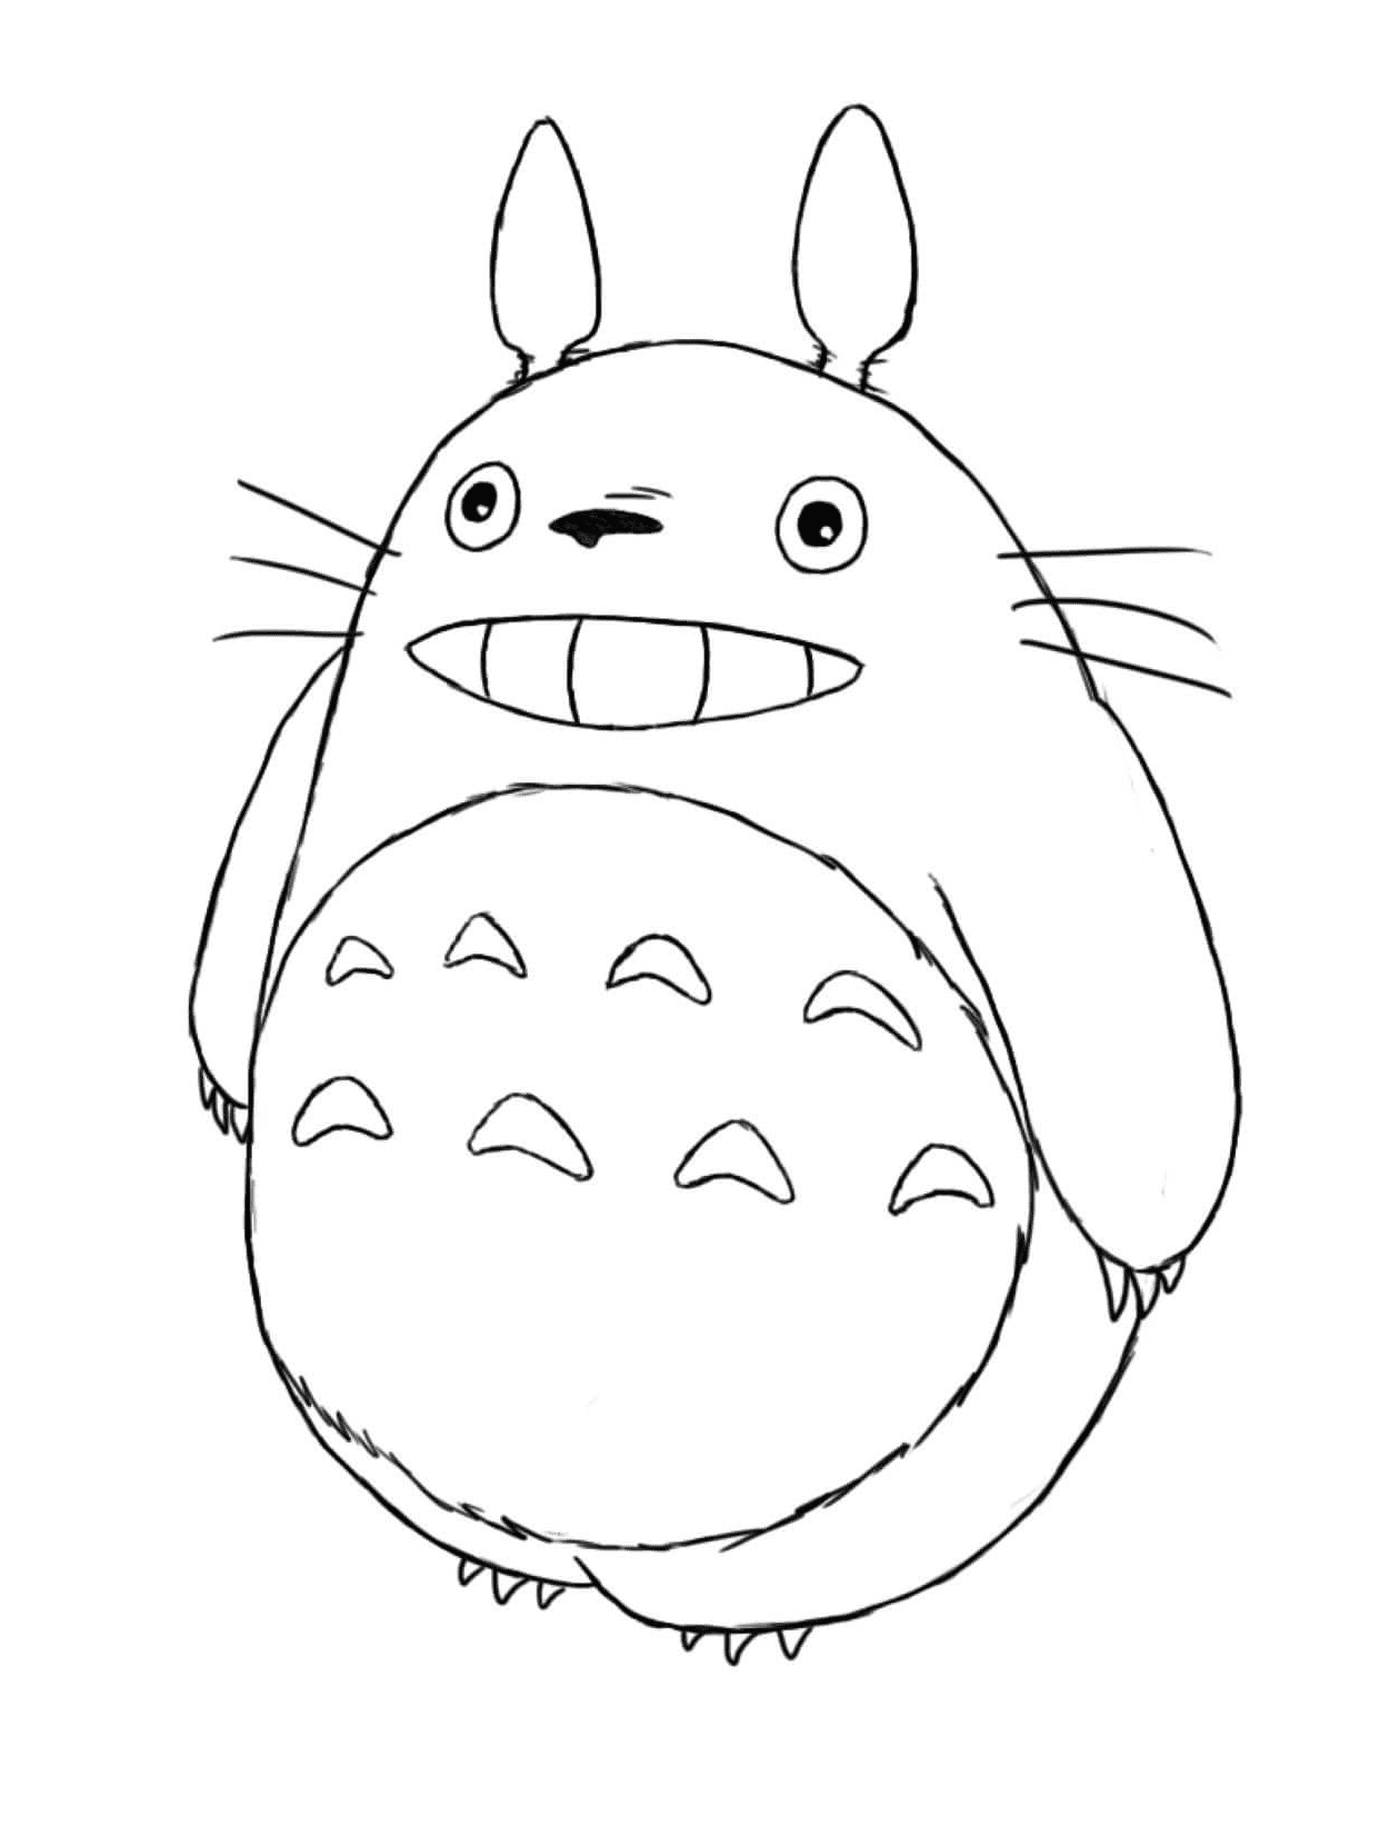  Totoro with a big smile 